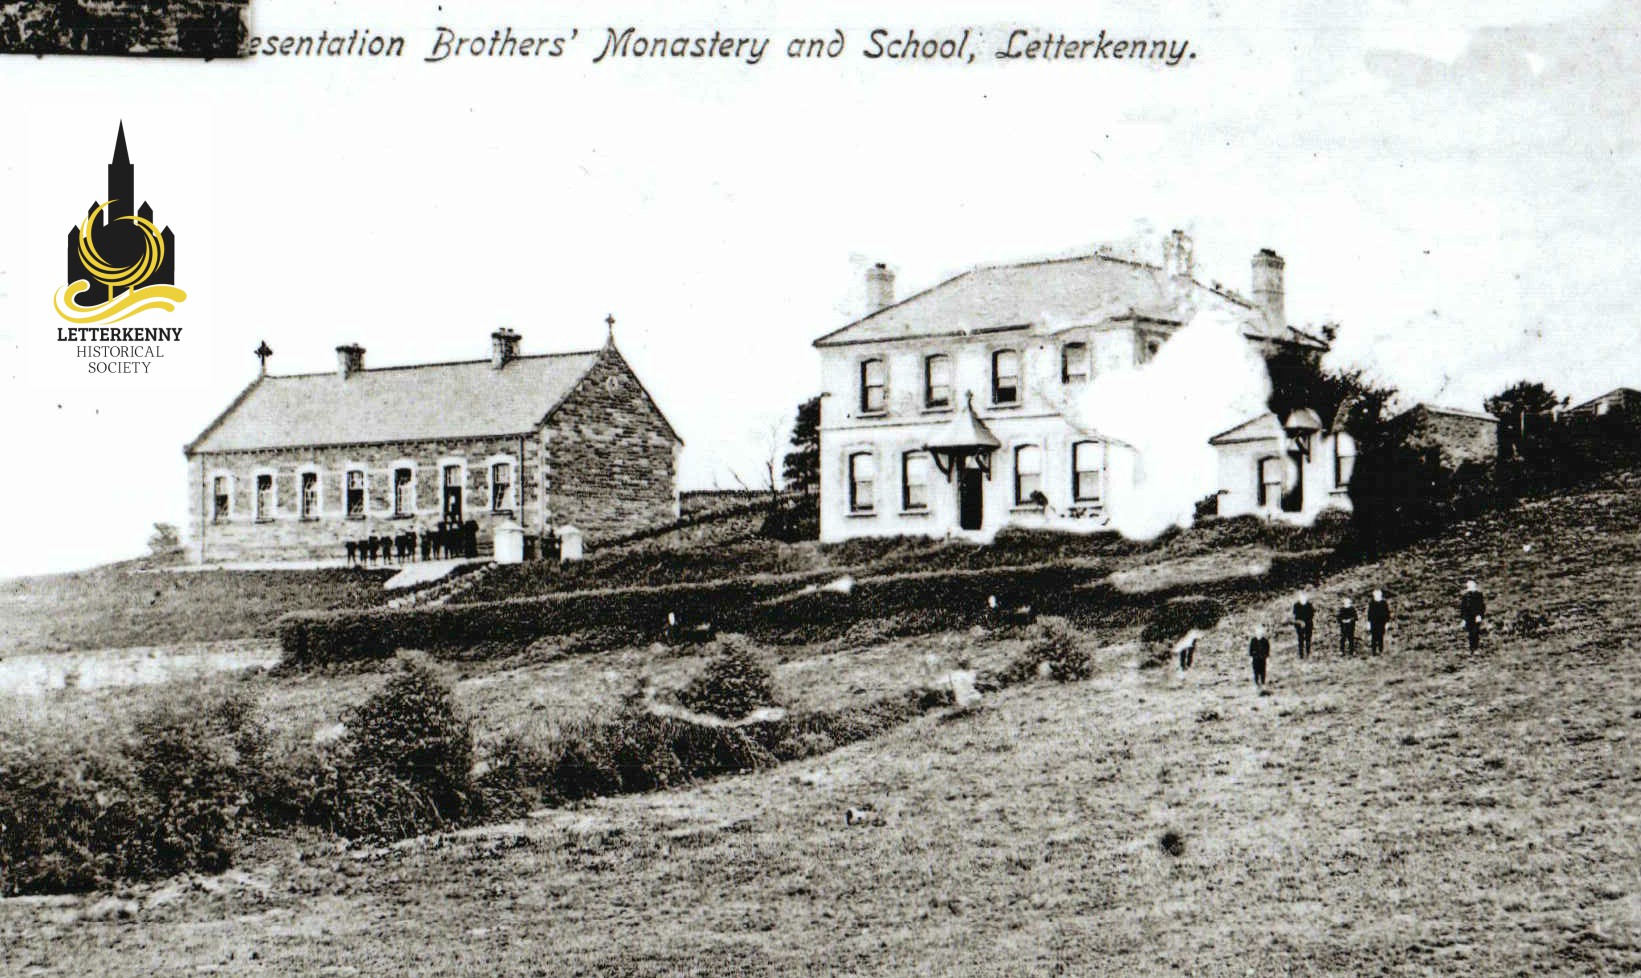 Presentation Brothers School and Monastery